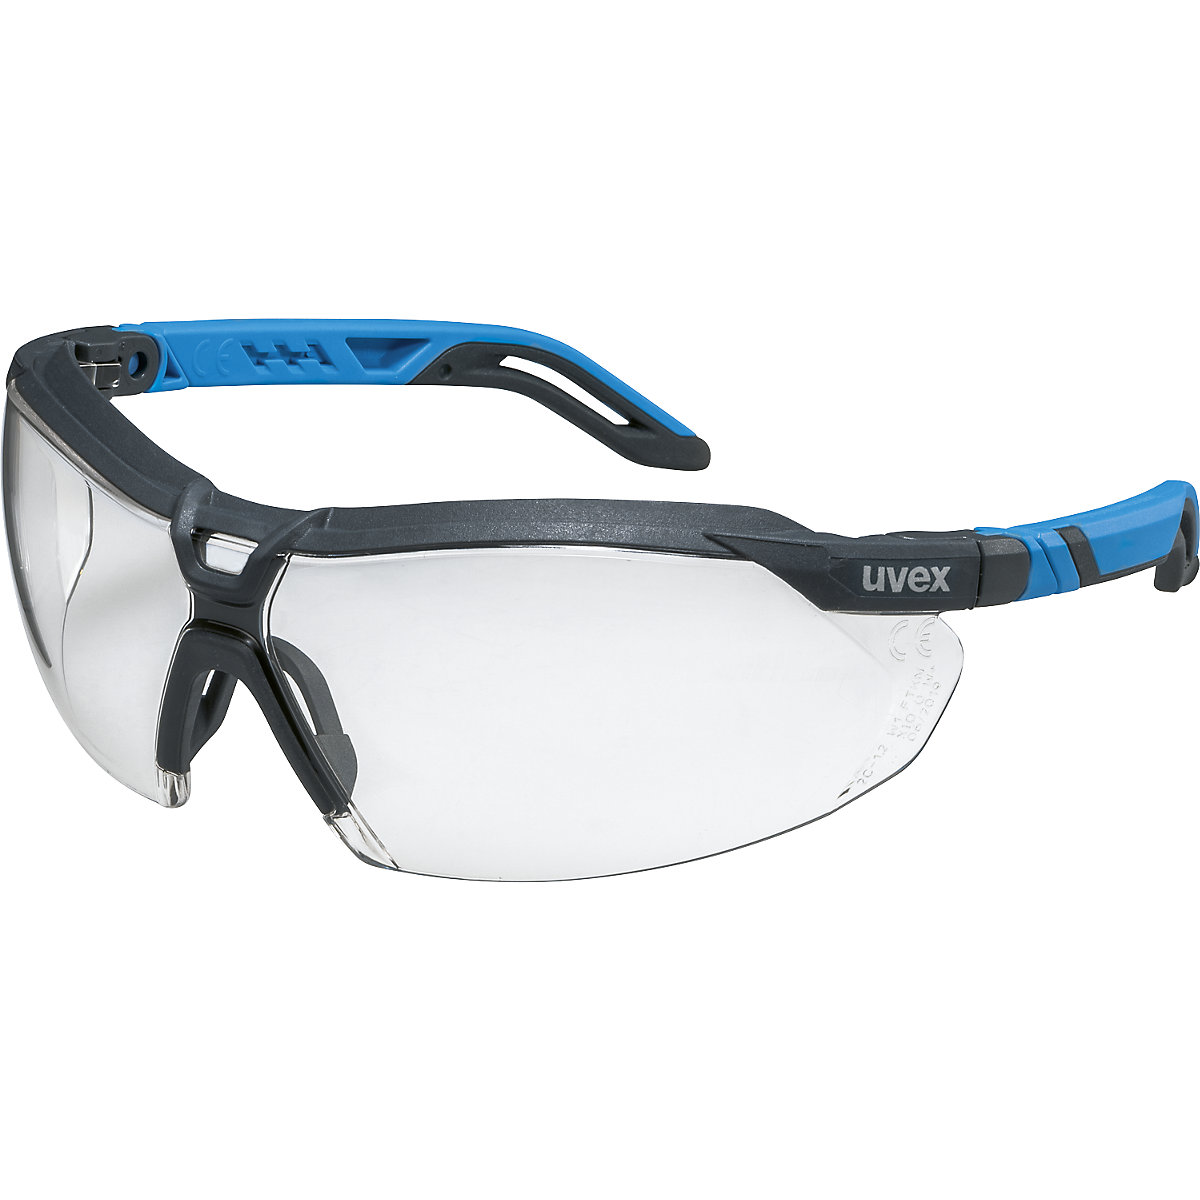 i-Series safety spectacles - Uvex